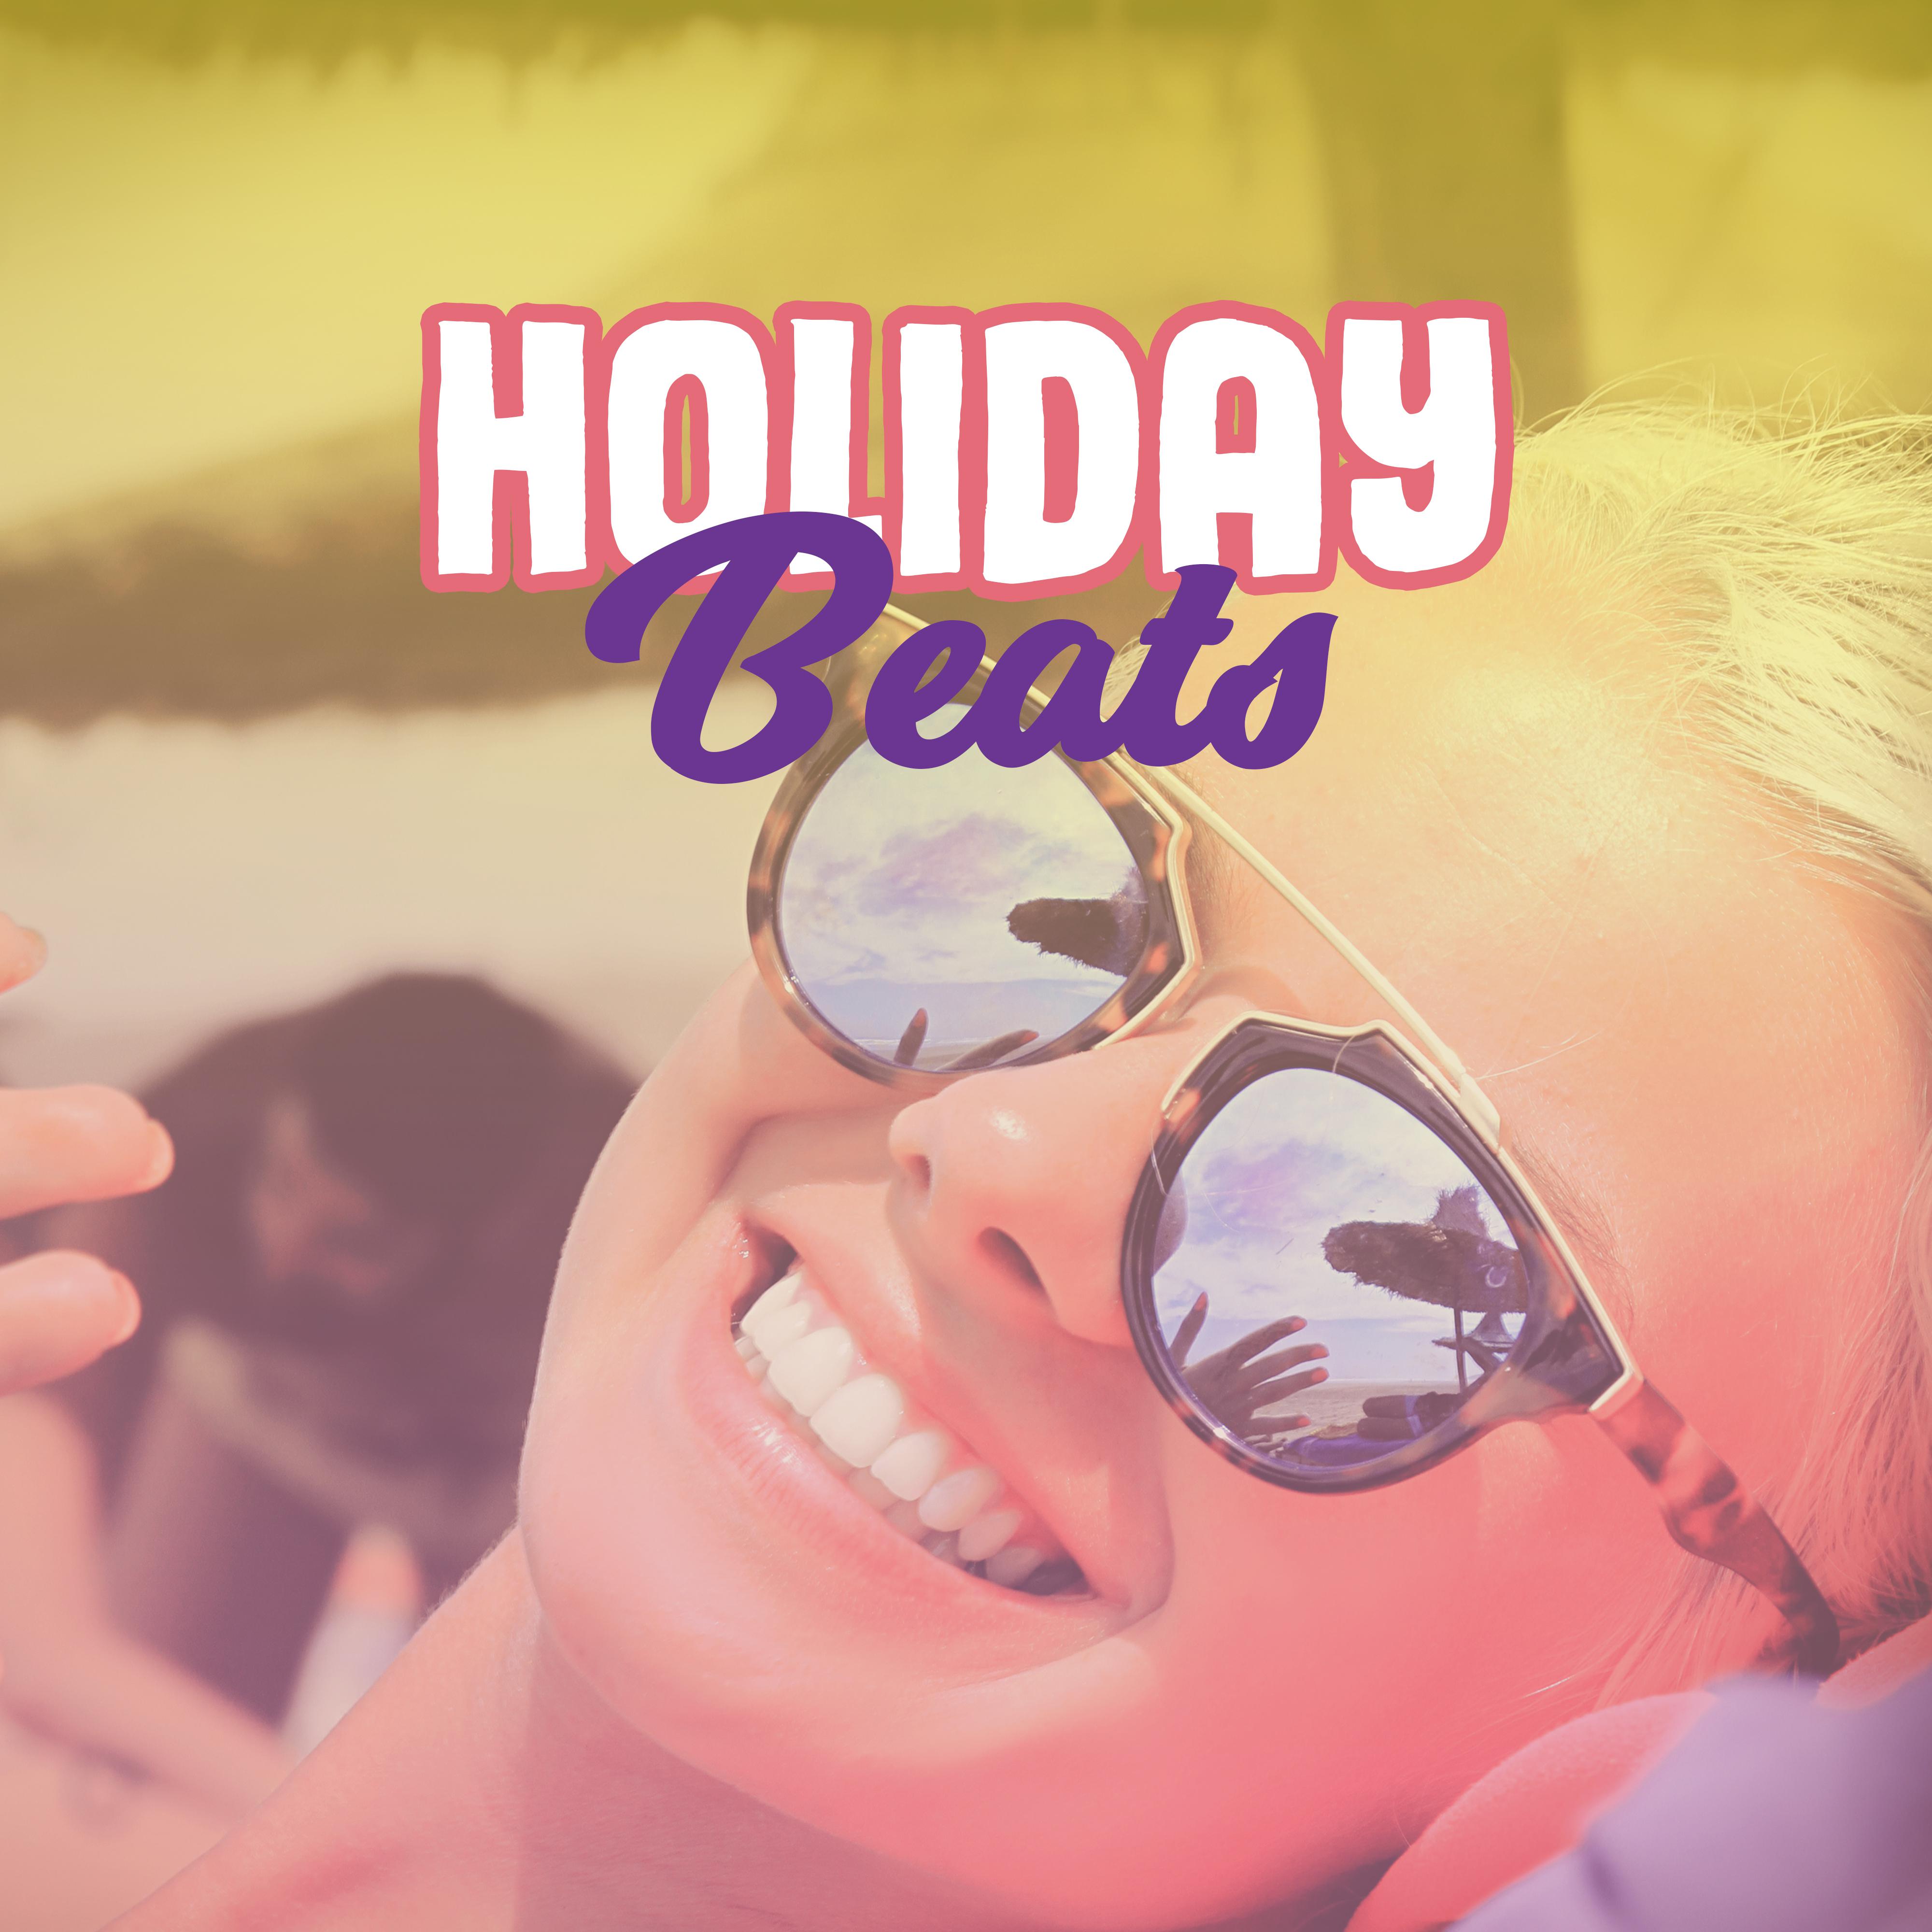 Holiday Beats – **** Vibes, Beach Party, Ibiza Lounge, Summertime, Dance Floor, Holiday Chill Out Music, Dance Party